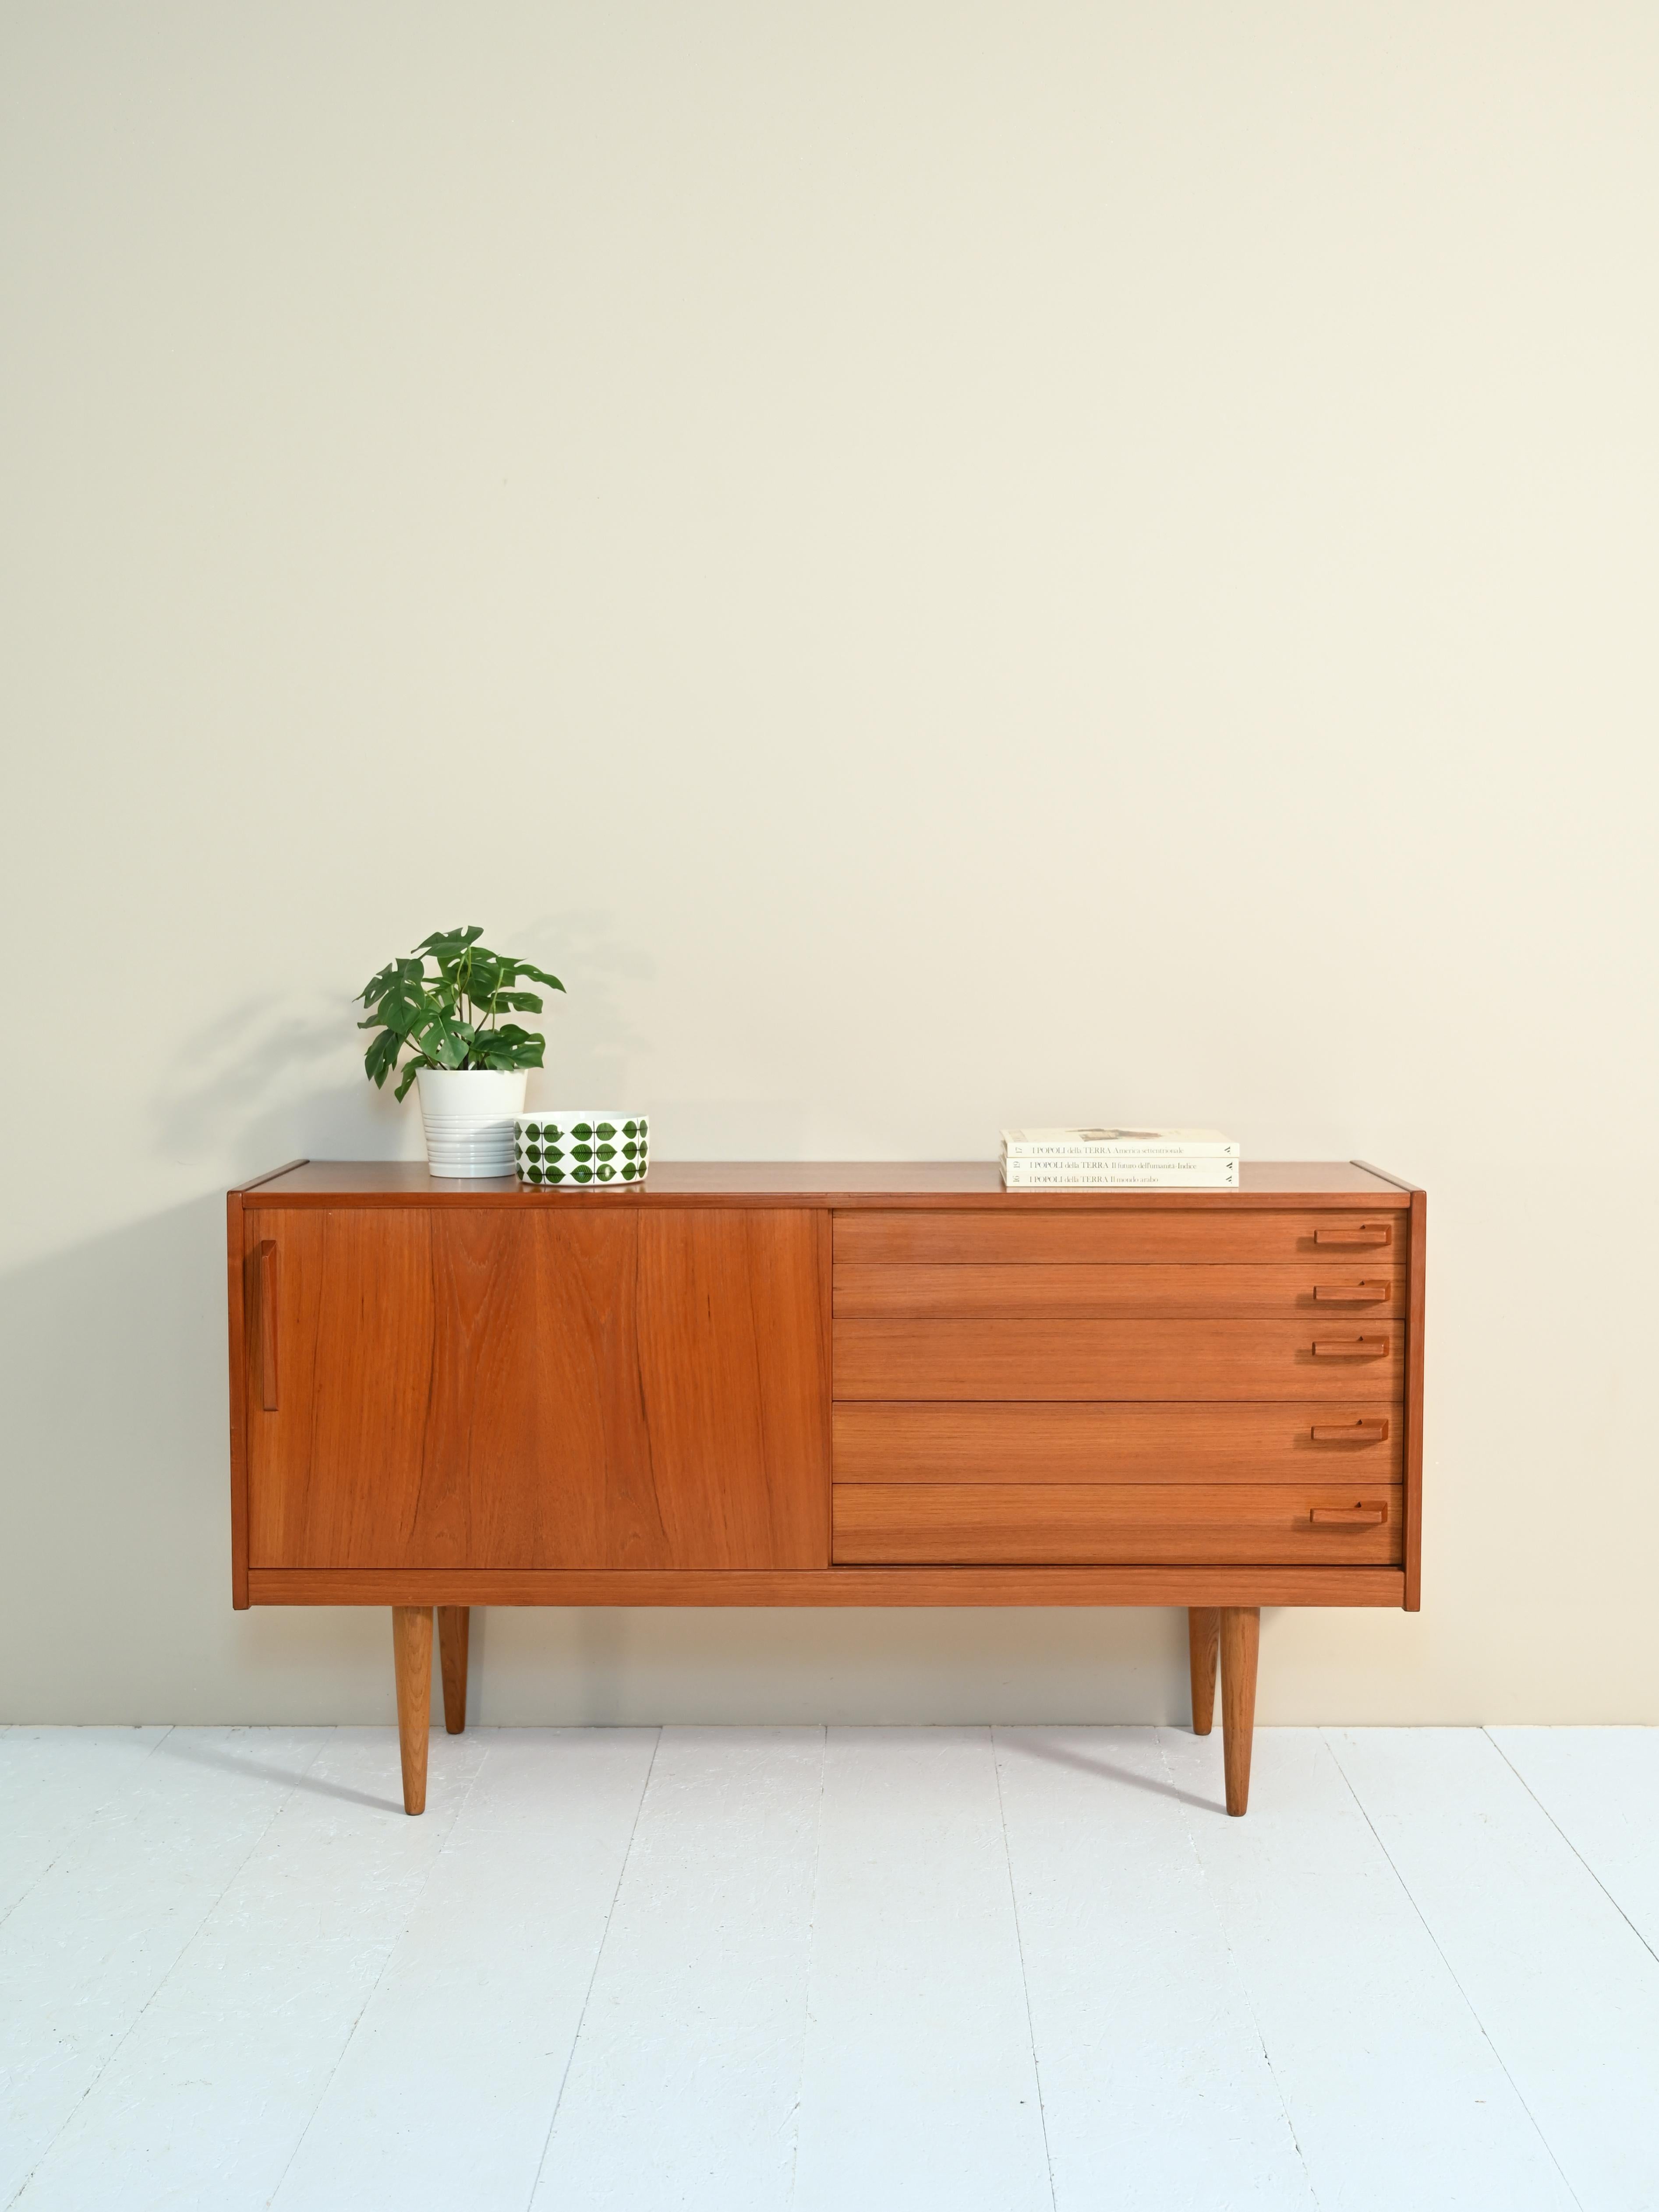 Scandinavian sideboard by designer Yngve Ekström produced at the turn of the 1950s-60s in Sweden.

The vintage sideboard features a sliding door on the right side and five drawers on the left side.

The characteristic elements of this sideboard